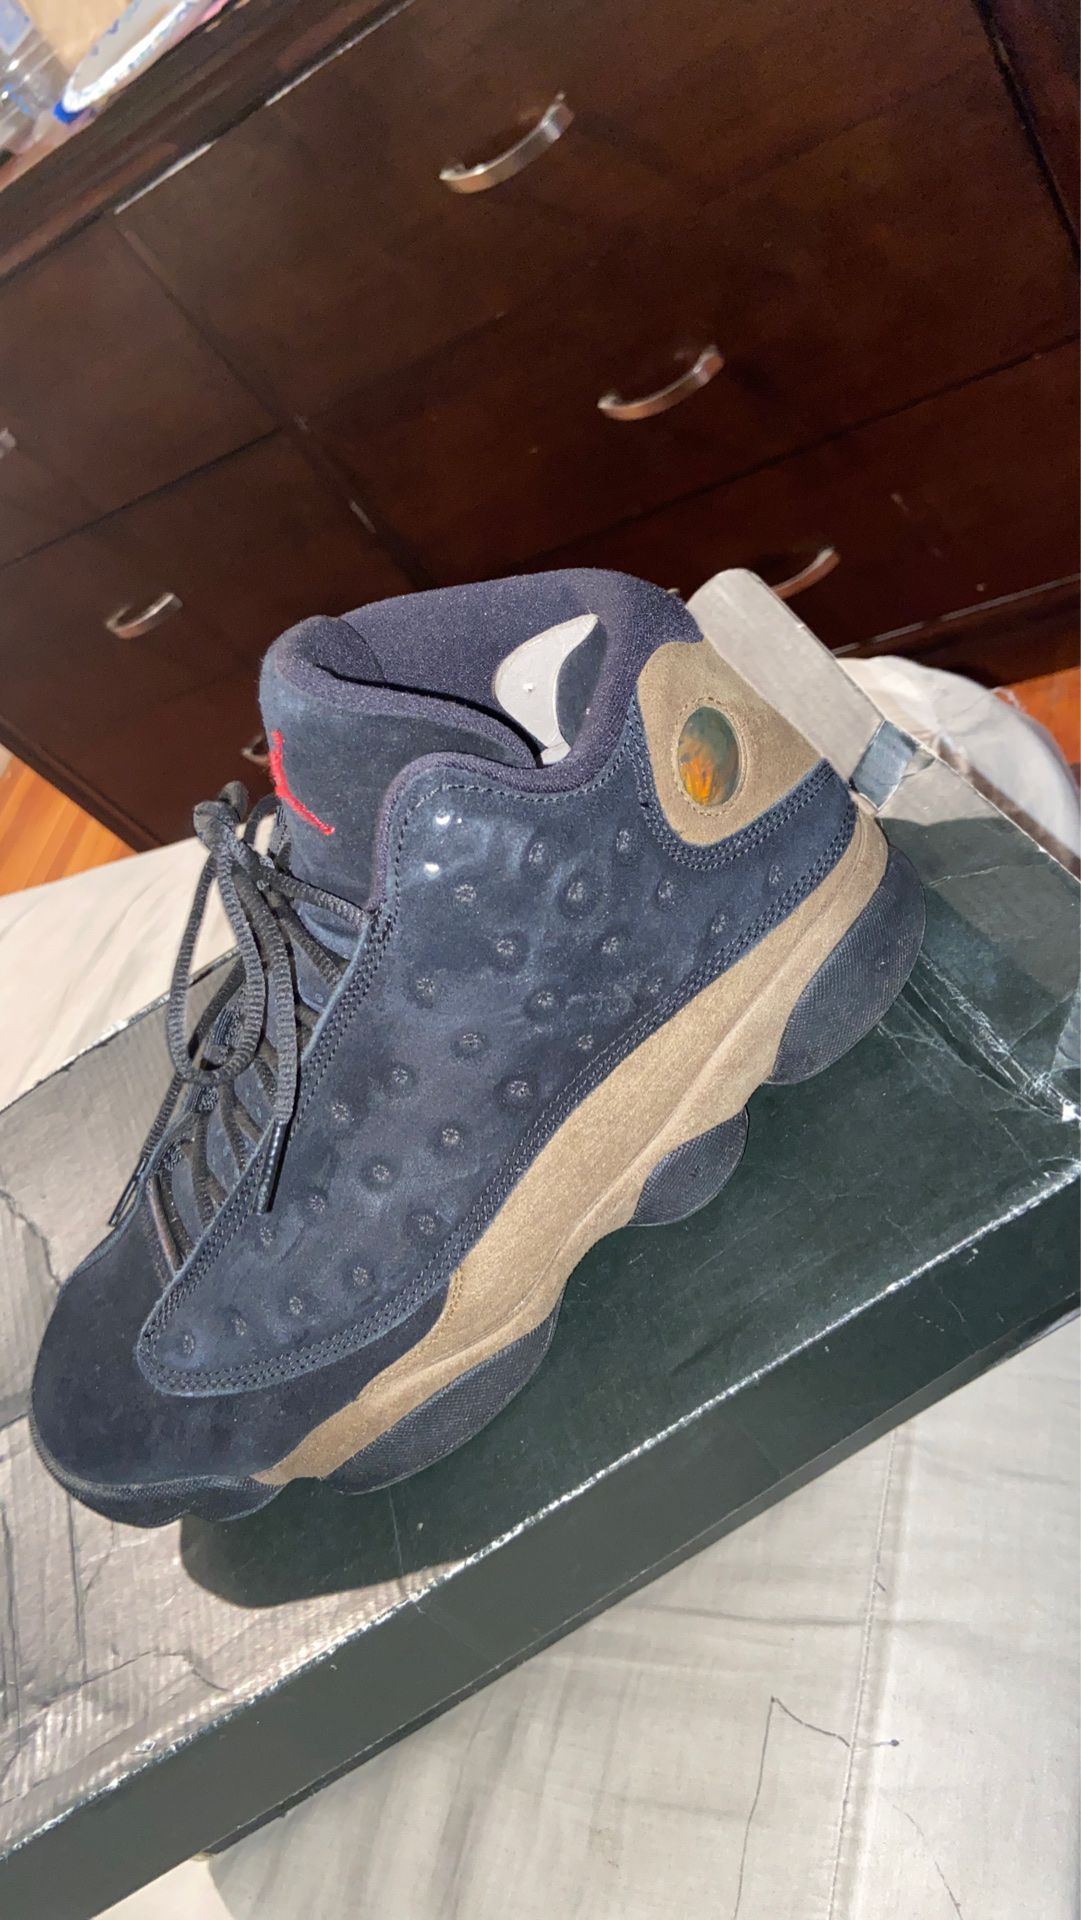 Size 9.5 Jordan 13 willing to trade for a size 9